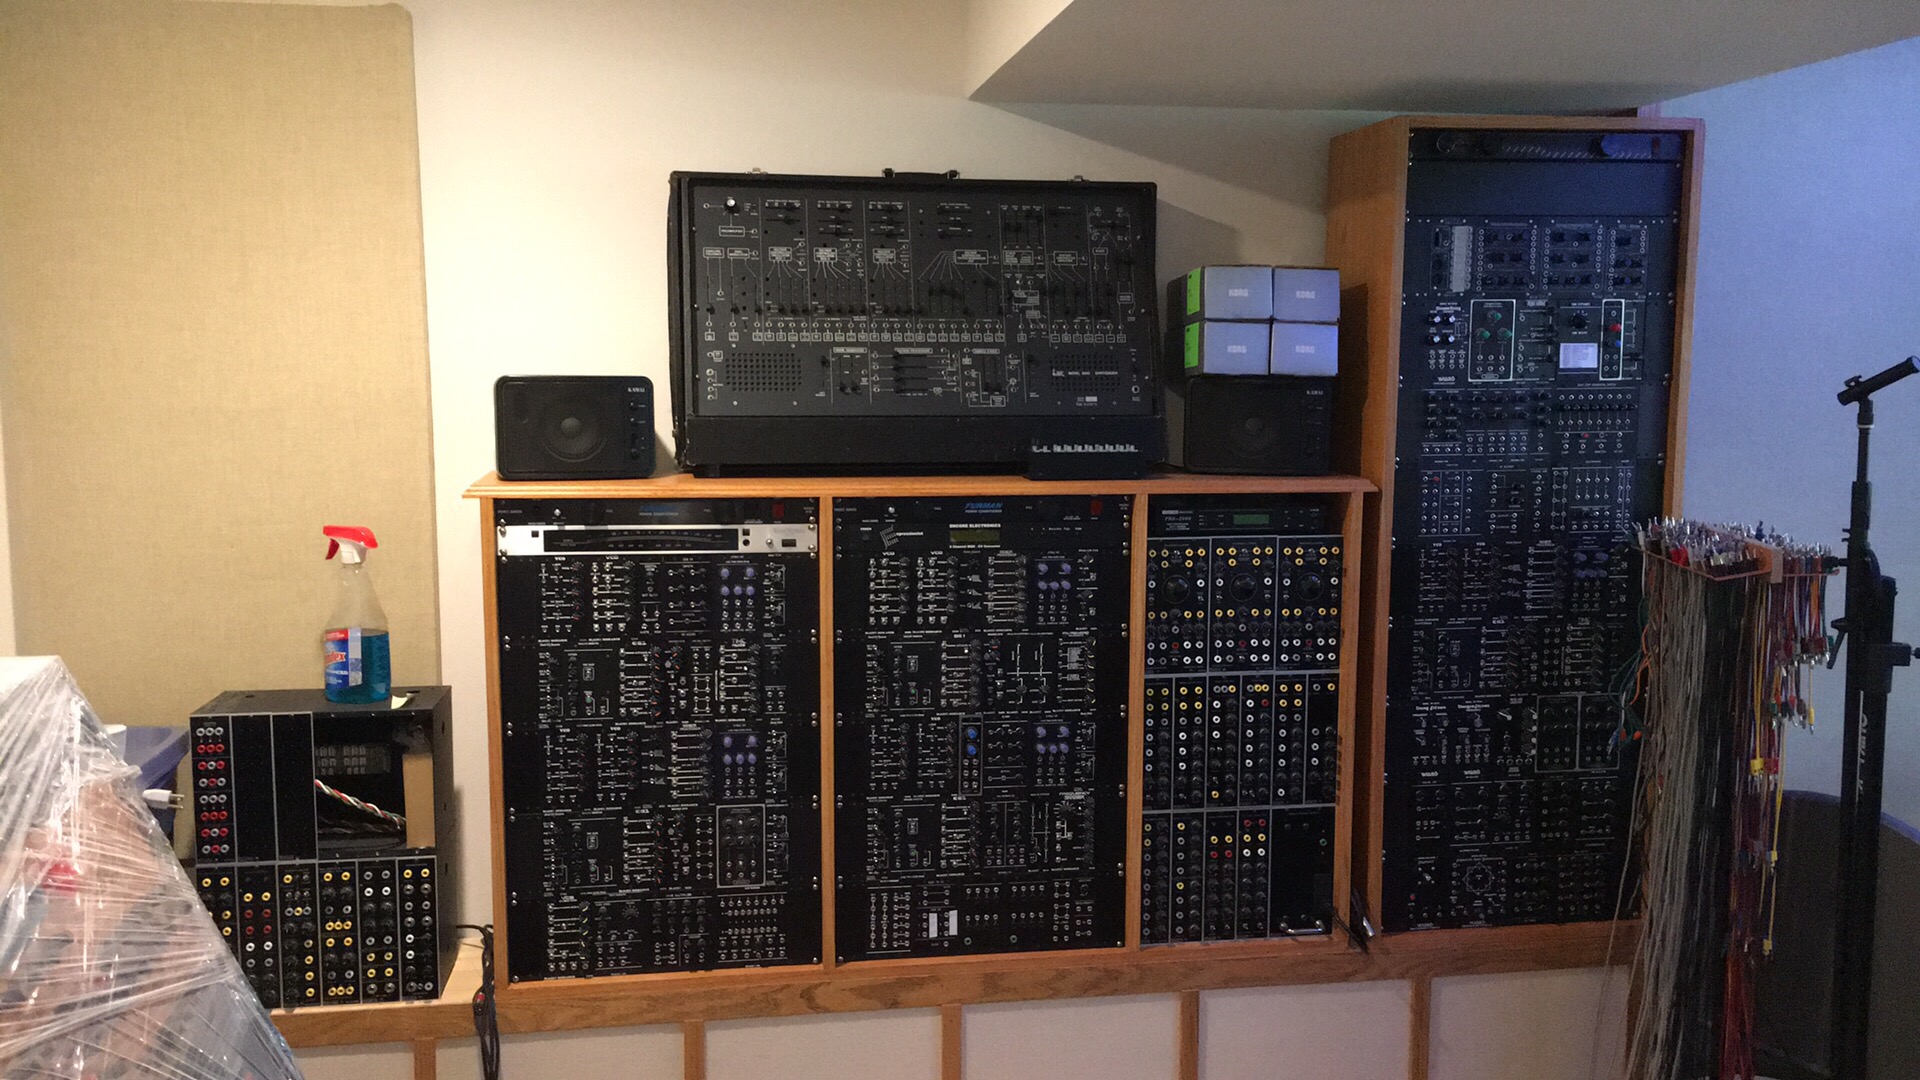 The modular synthesizer took over 14 years to assemble. It includes over 100 modules from Blacet, Modcan, Paia, Doepfer, Metalbox, and several of my own creation.